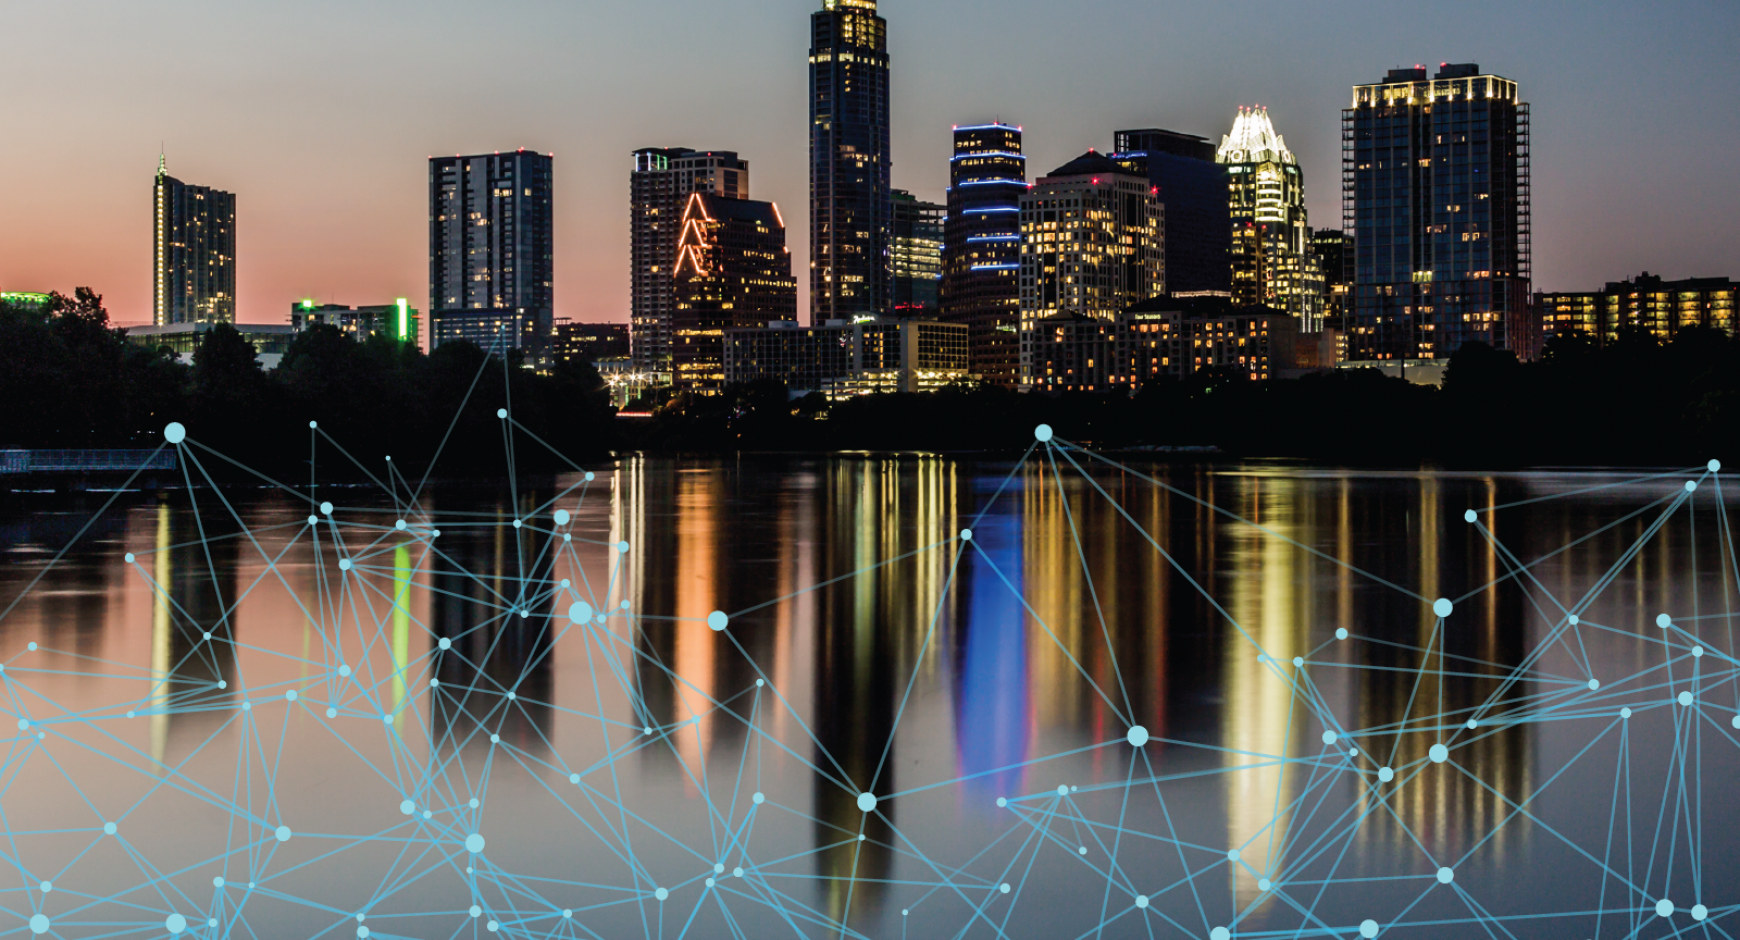 Austin skyline during evening overlaid with a graphic of a network web